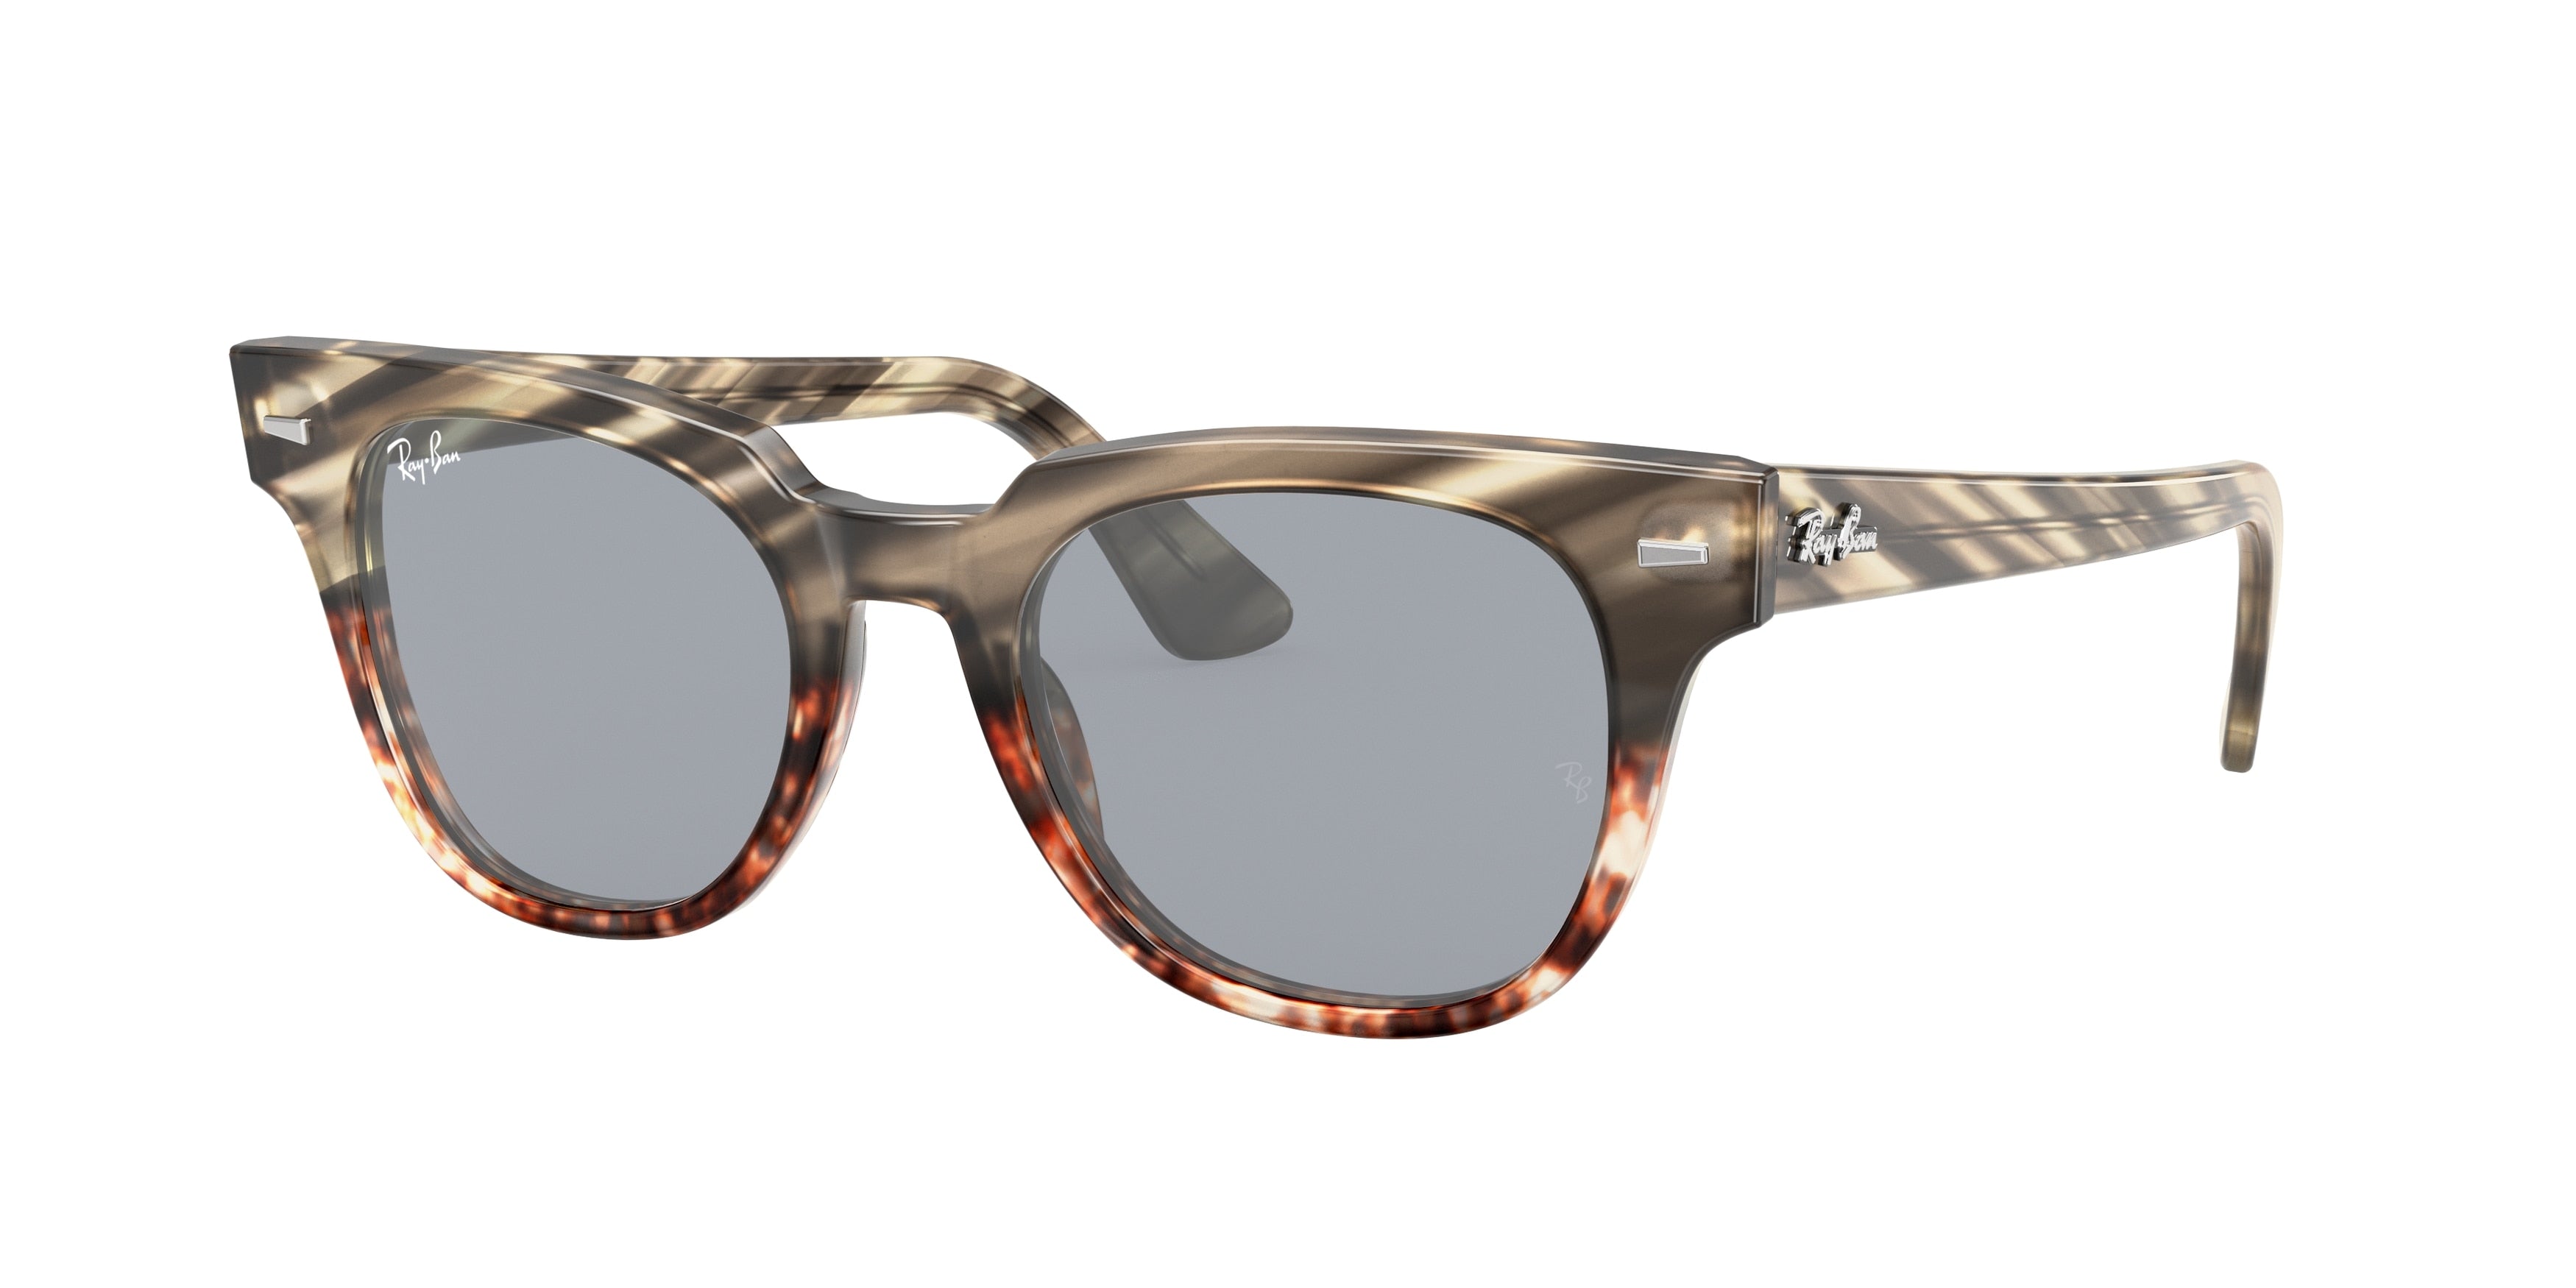 Ray-Ban METEOR RB2168 Square Sunglasses  1254Y5-Striped Grey & Brown 49-150-20 - Color Map Grey